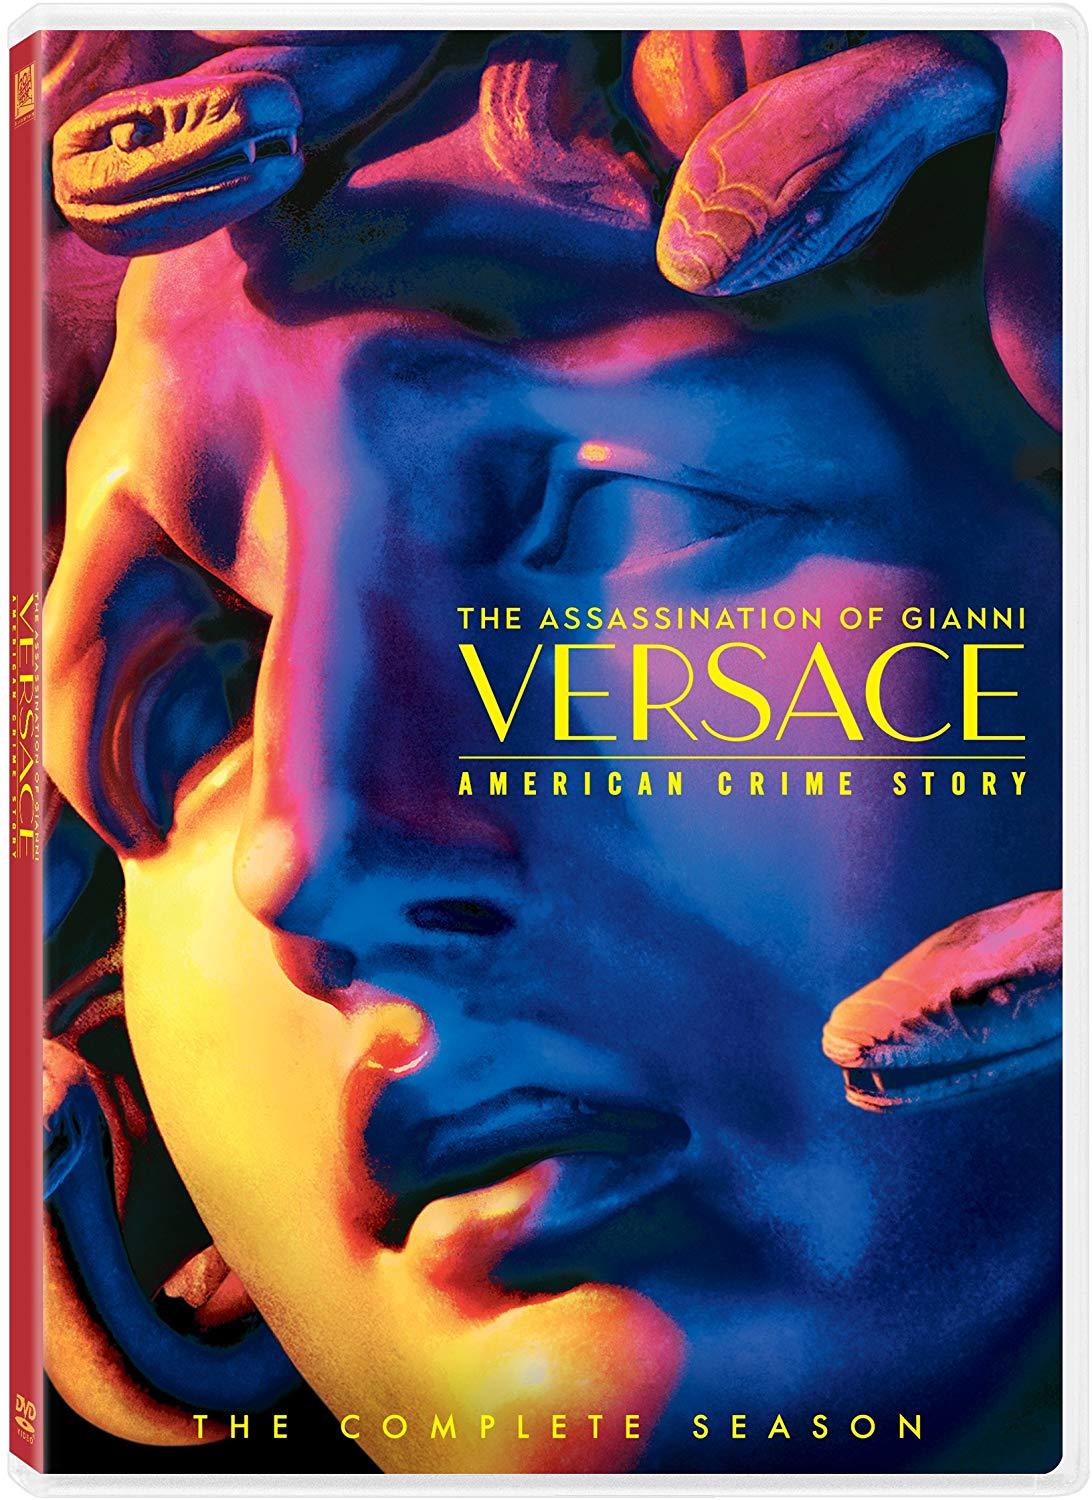 ACSversace - The Assassination of Gianni Versace:  American Crime Story - Page 28 Tumblr_pc197qqPNx1wpi2k2o1_1280